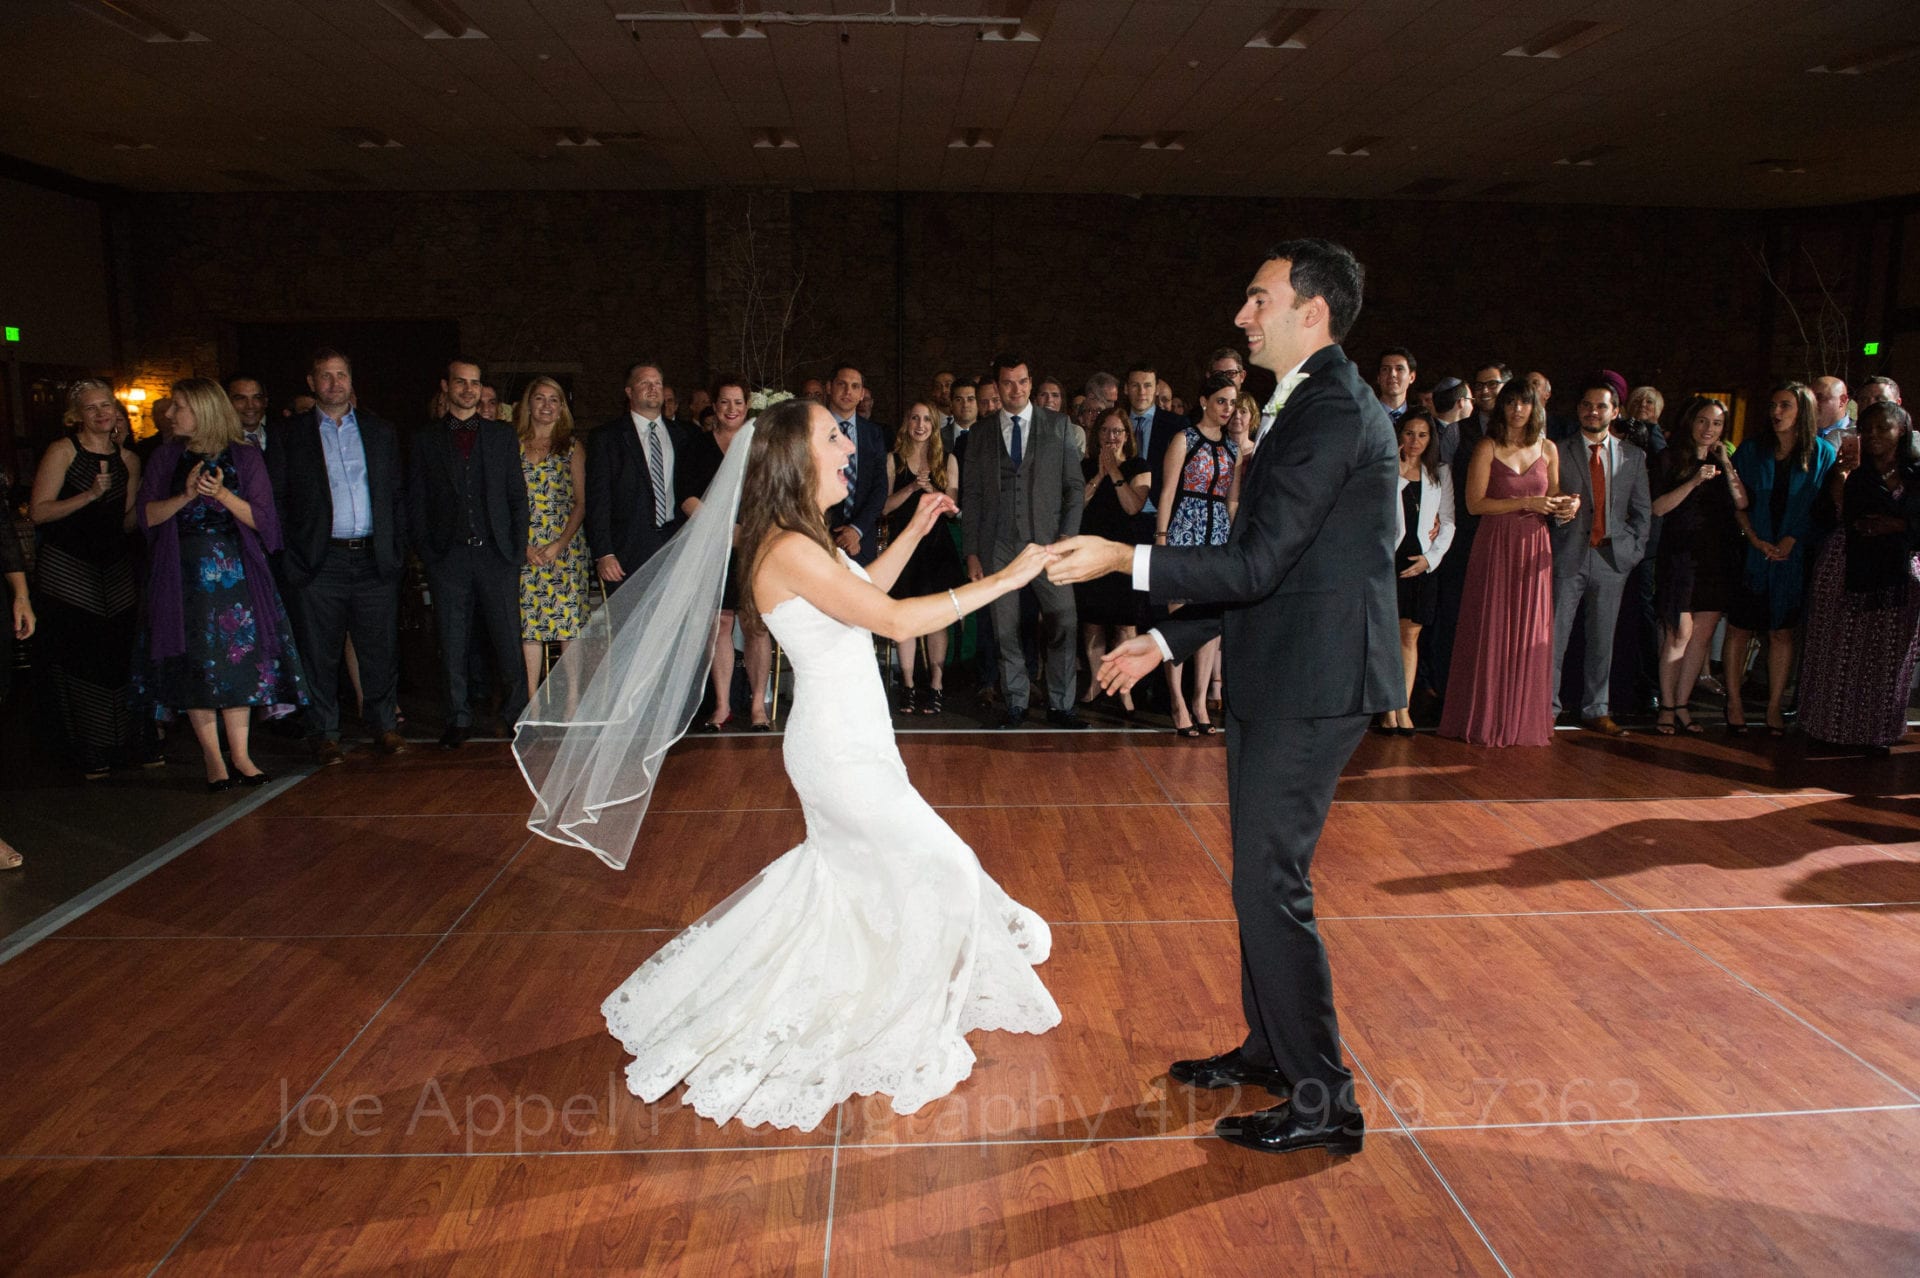 A bride and groom dance with each other in the middle of a dance floor surrounded by their guests.